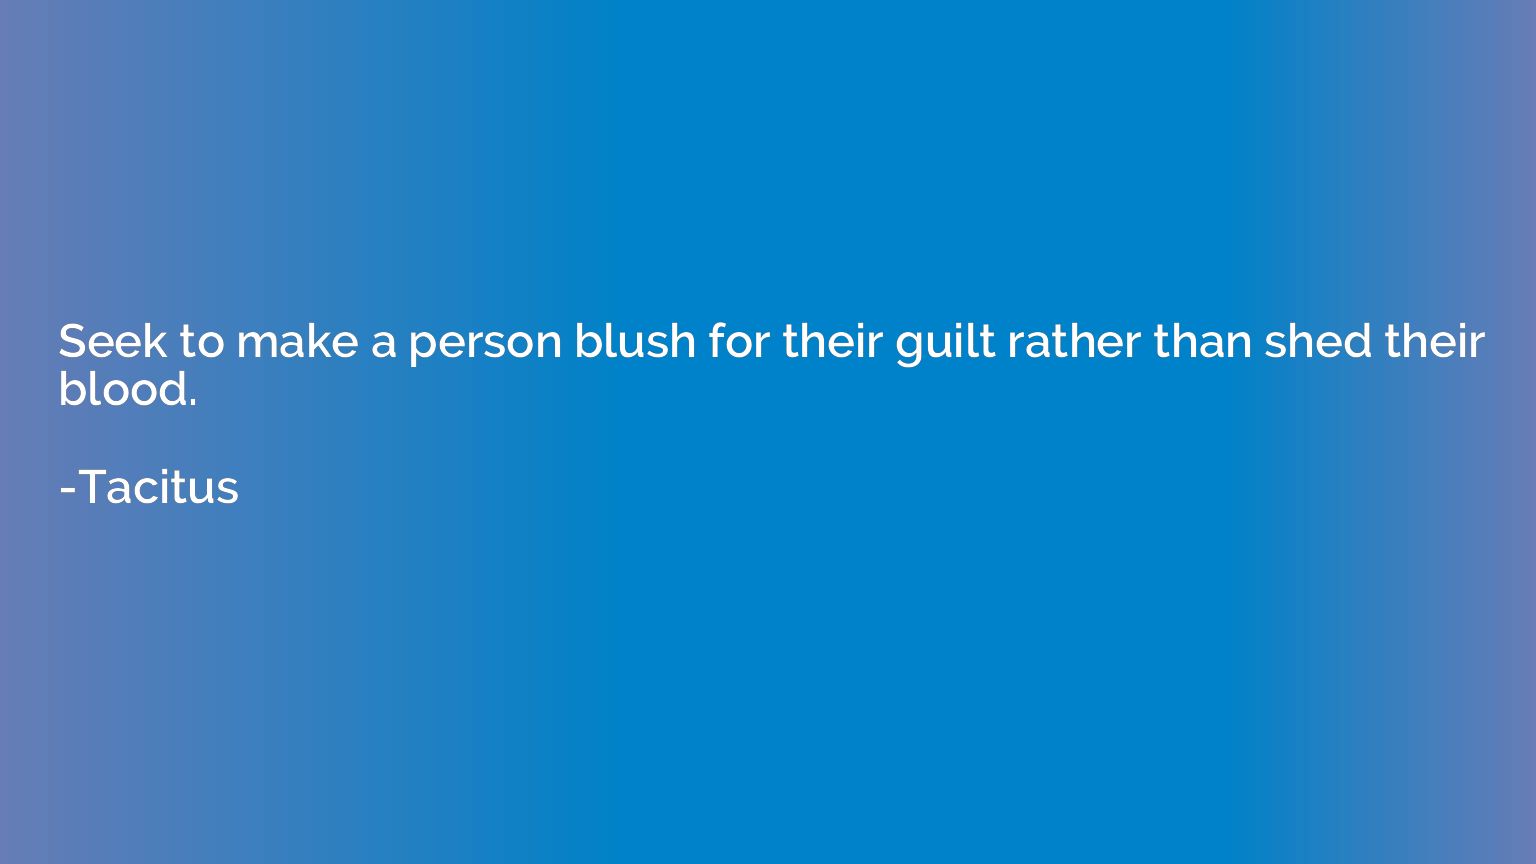 Seek to make a person blush for their guilt rather than shed